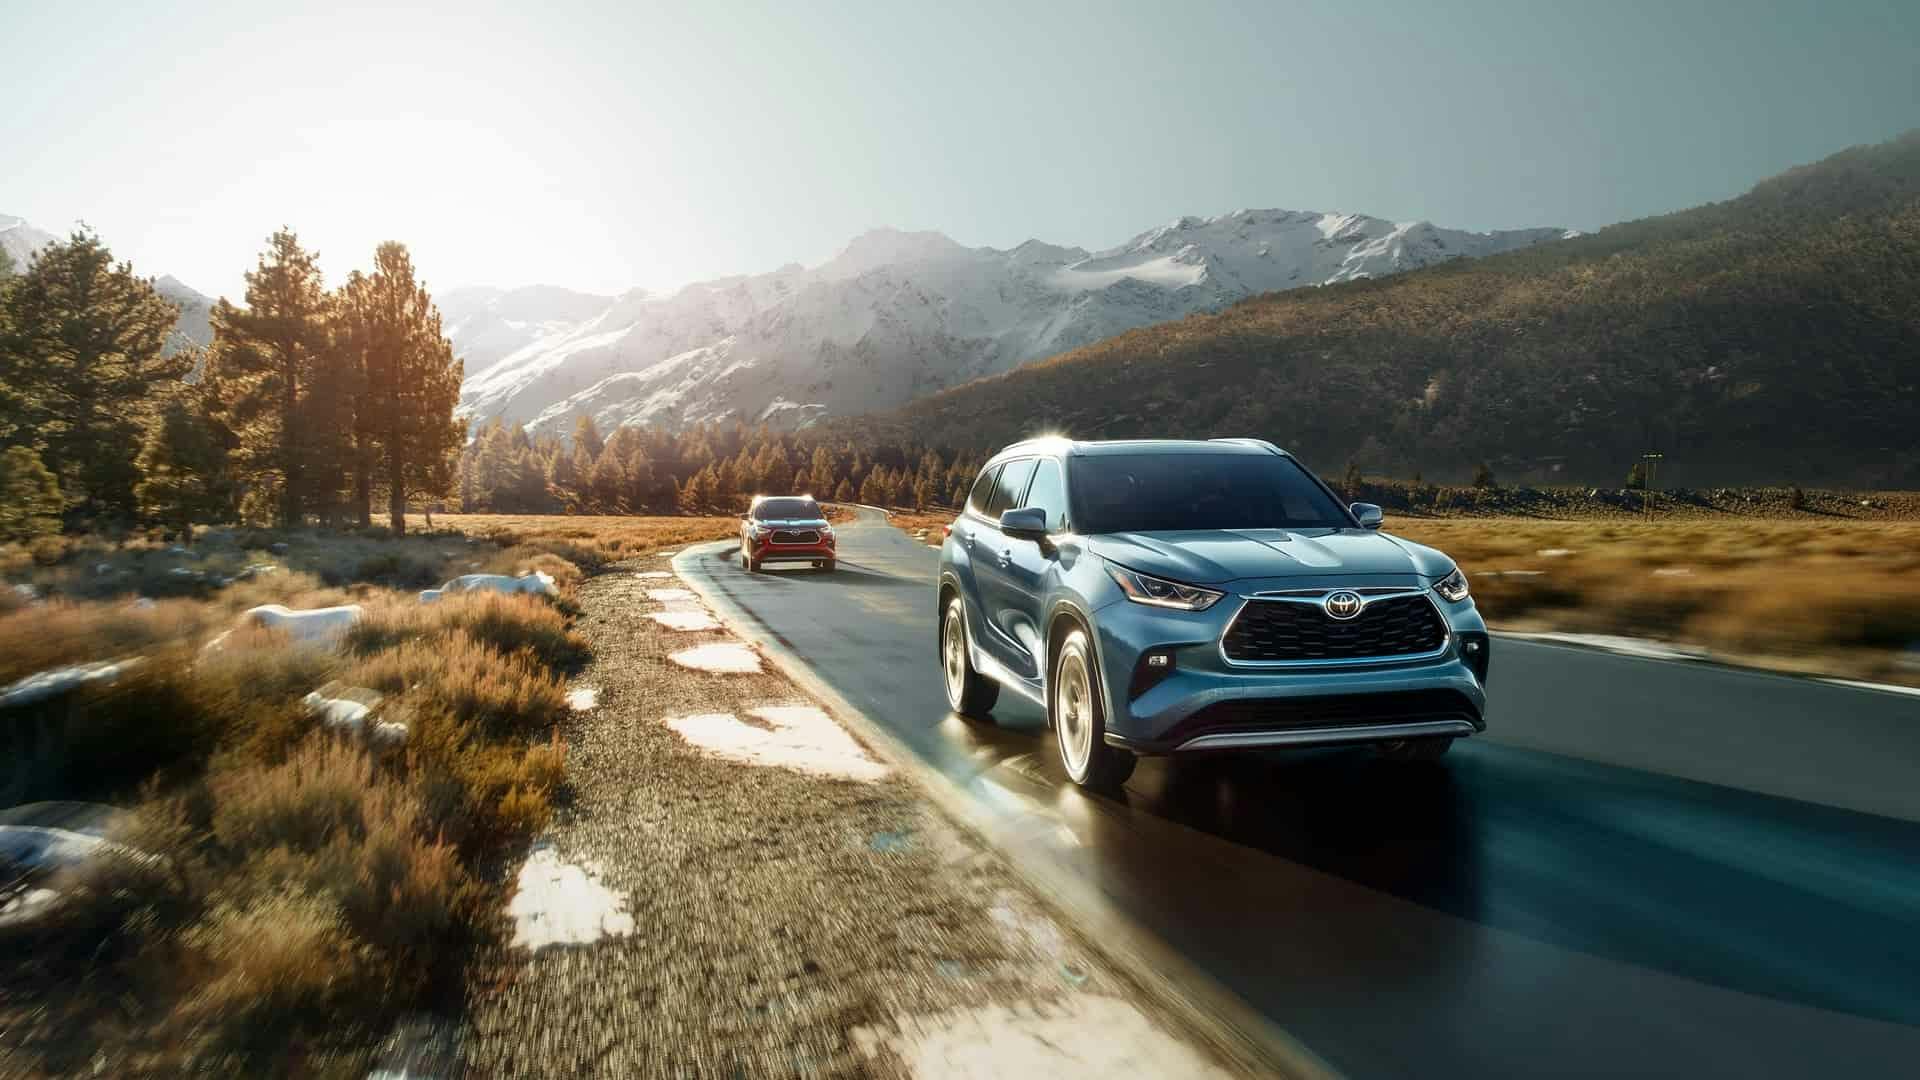 Get to know the 2020 Toyota Highlander near Mercer PA